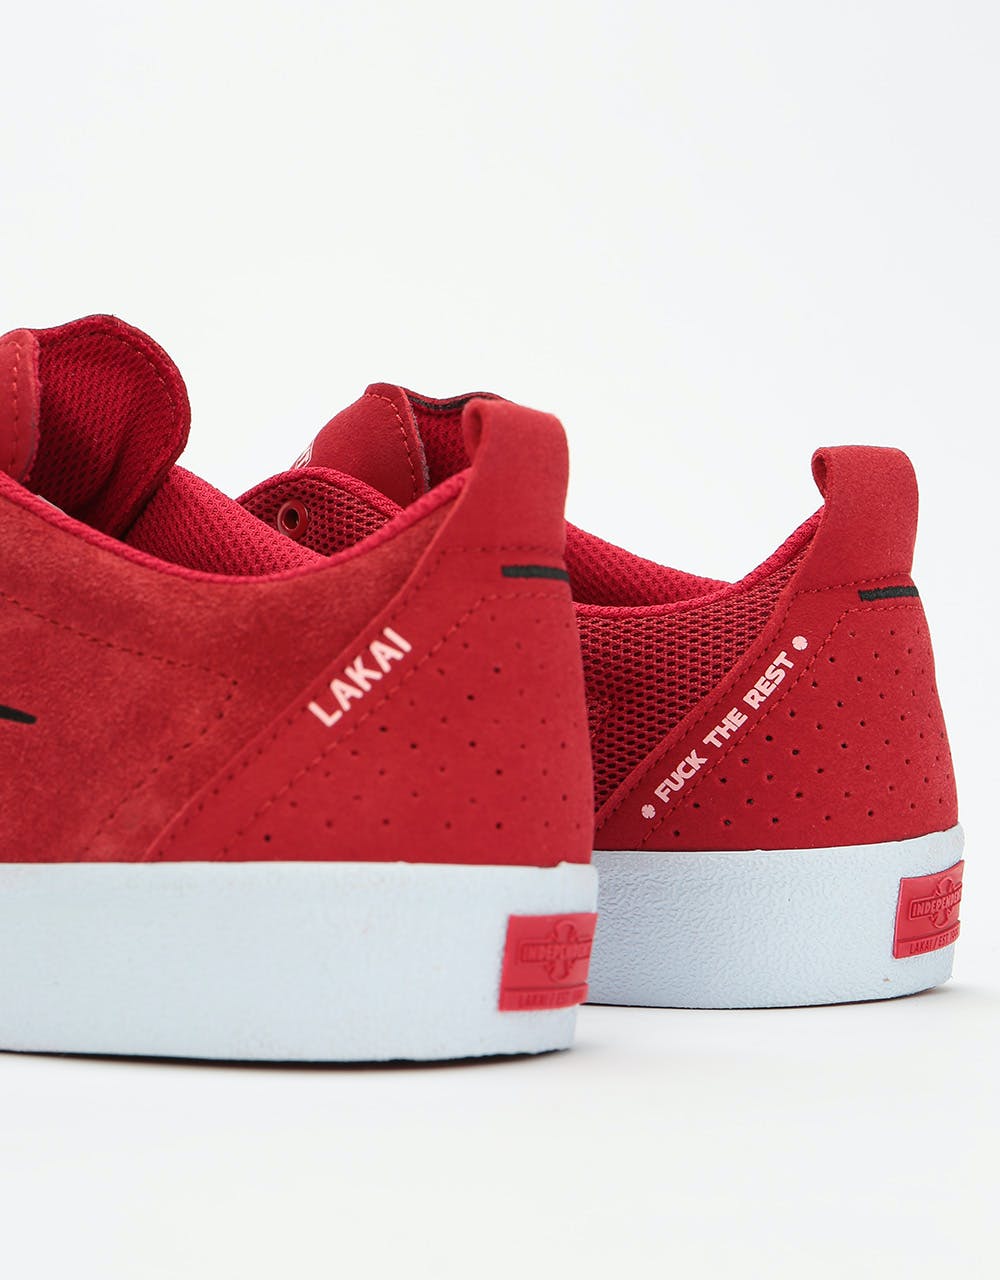 Lakai x Independent Bristol Skate Shoes - Red Suede